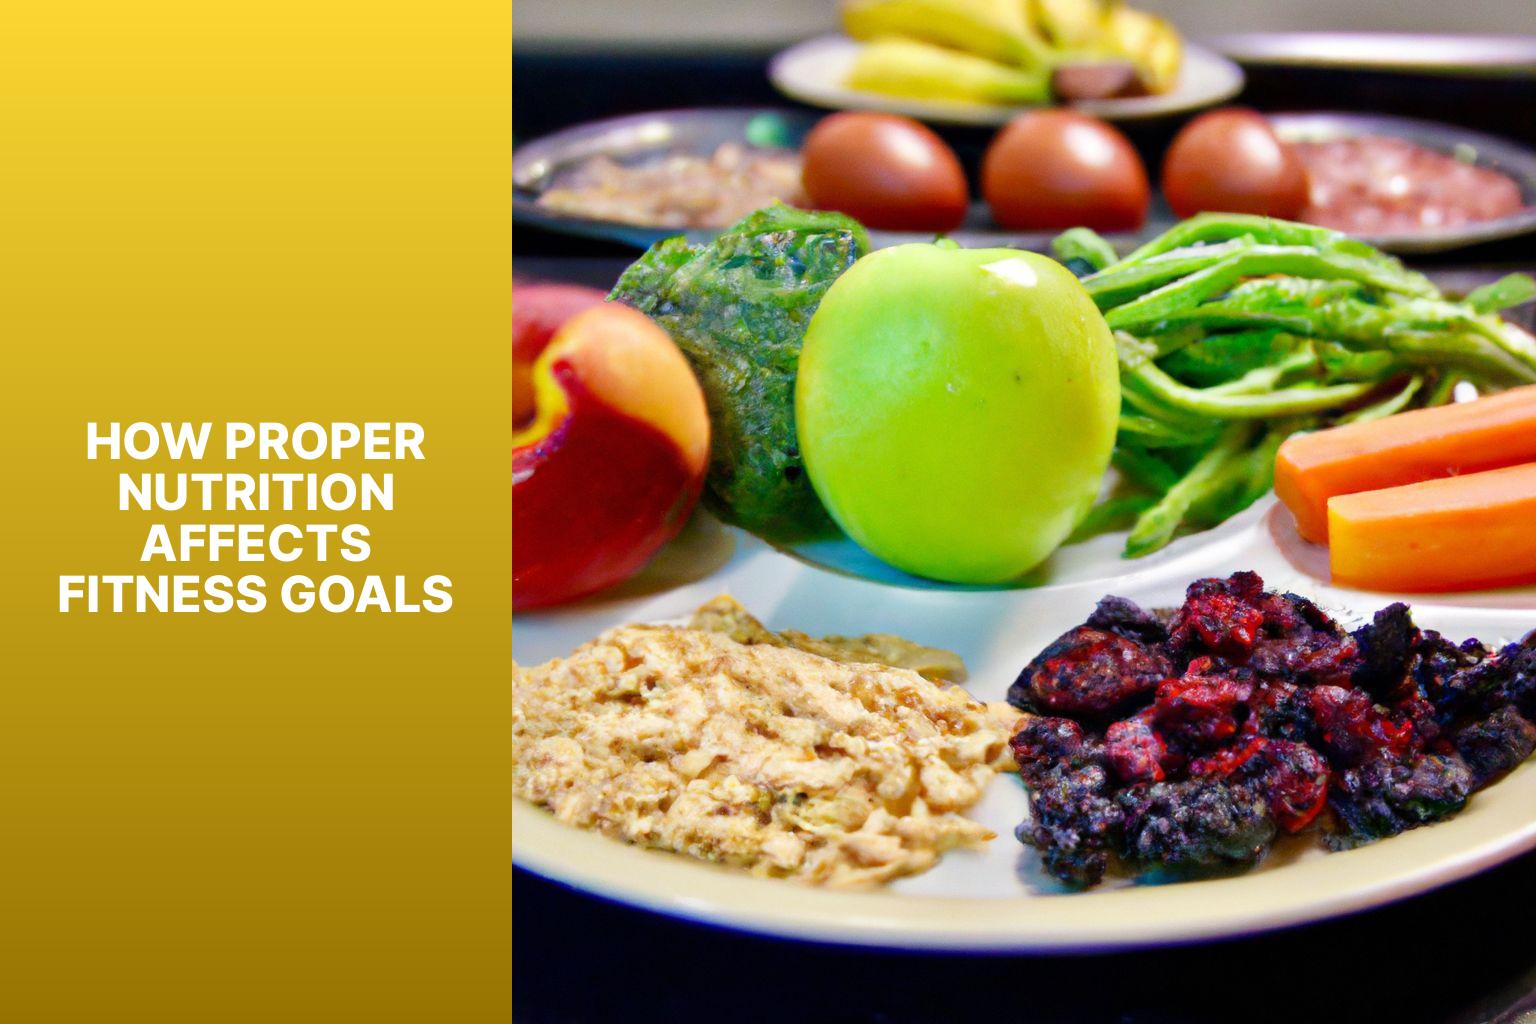 How Proper Nutrition Affects Fitness Goals - The Importance of Proper Nutrition in Achieving Fitness Goals 